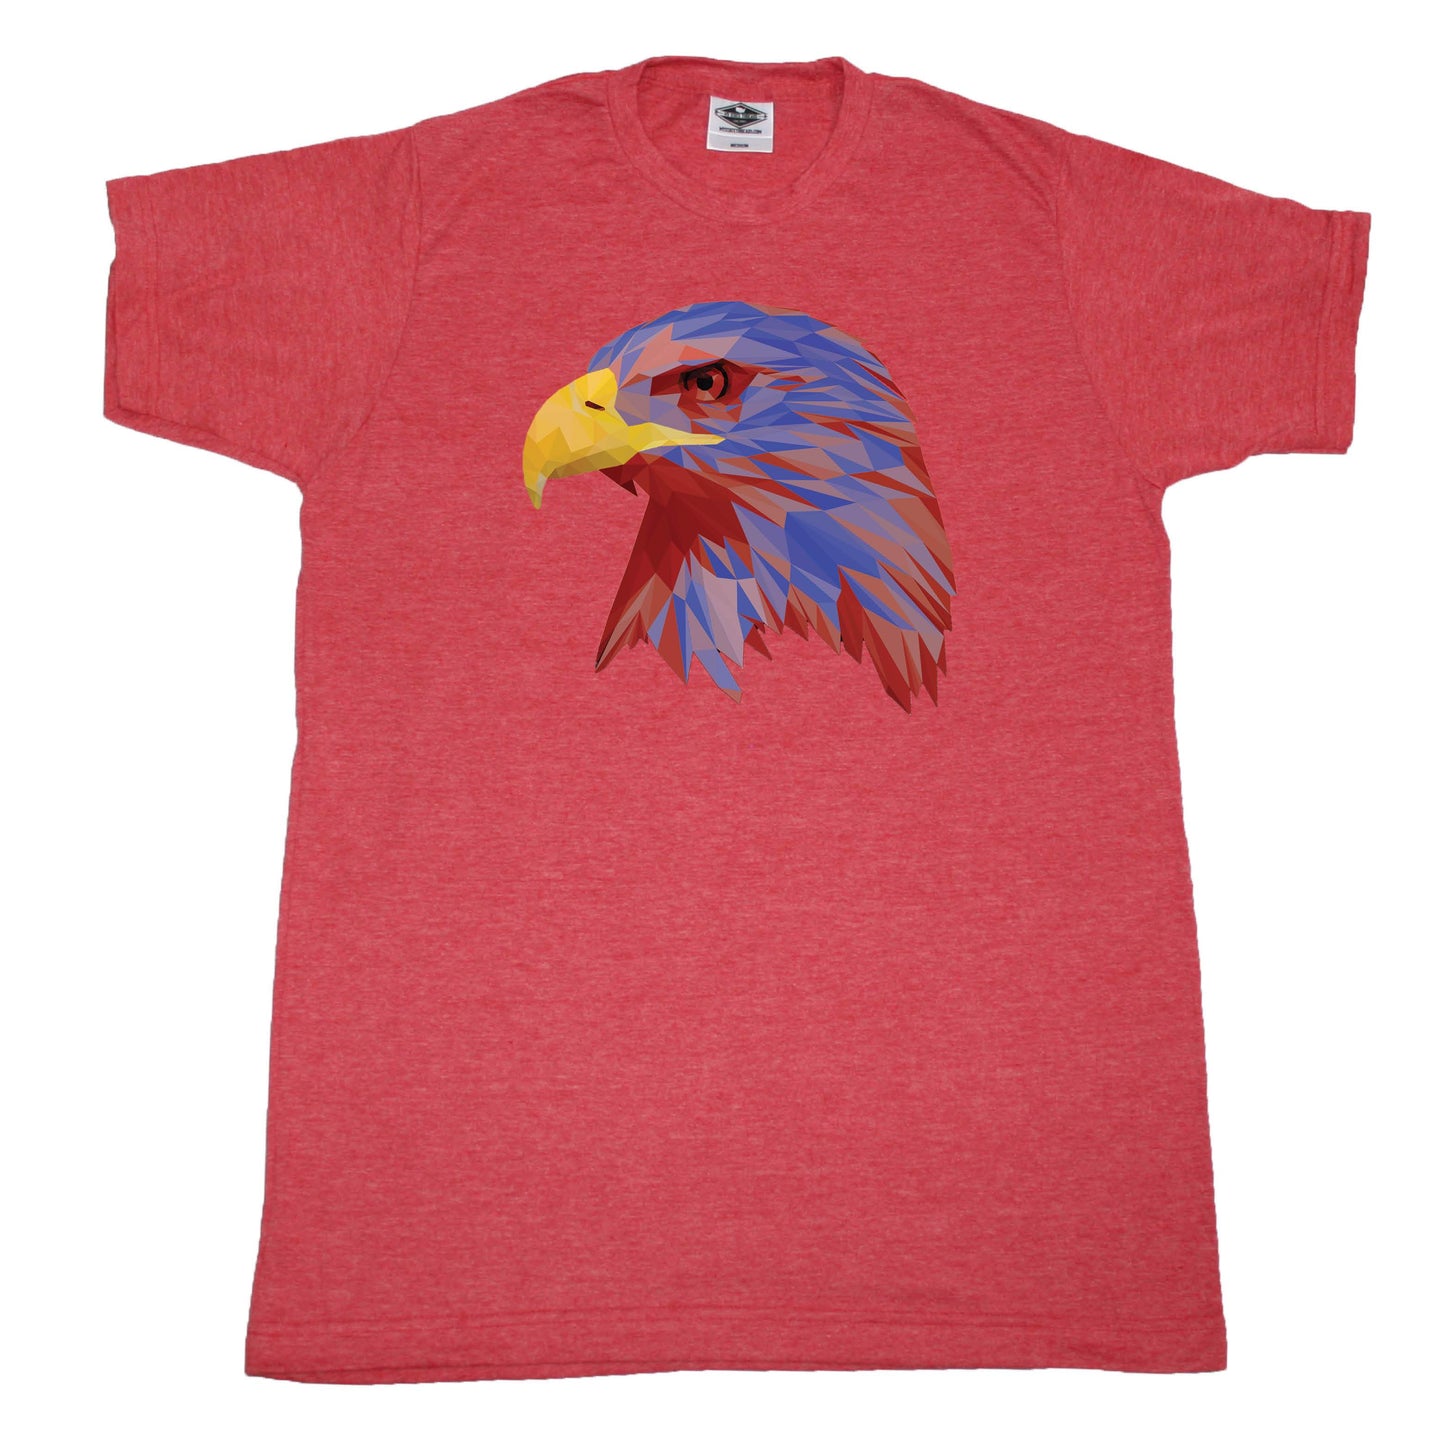 Low-Poly Eagle - Unisex Tee